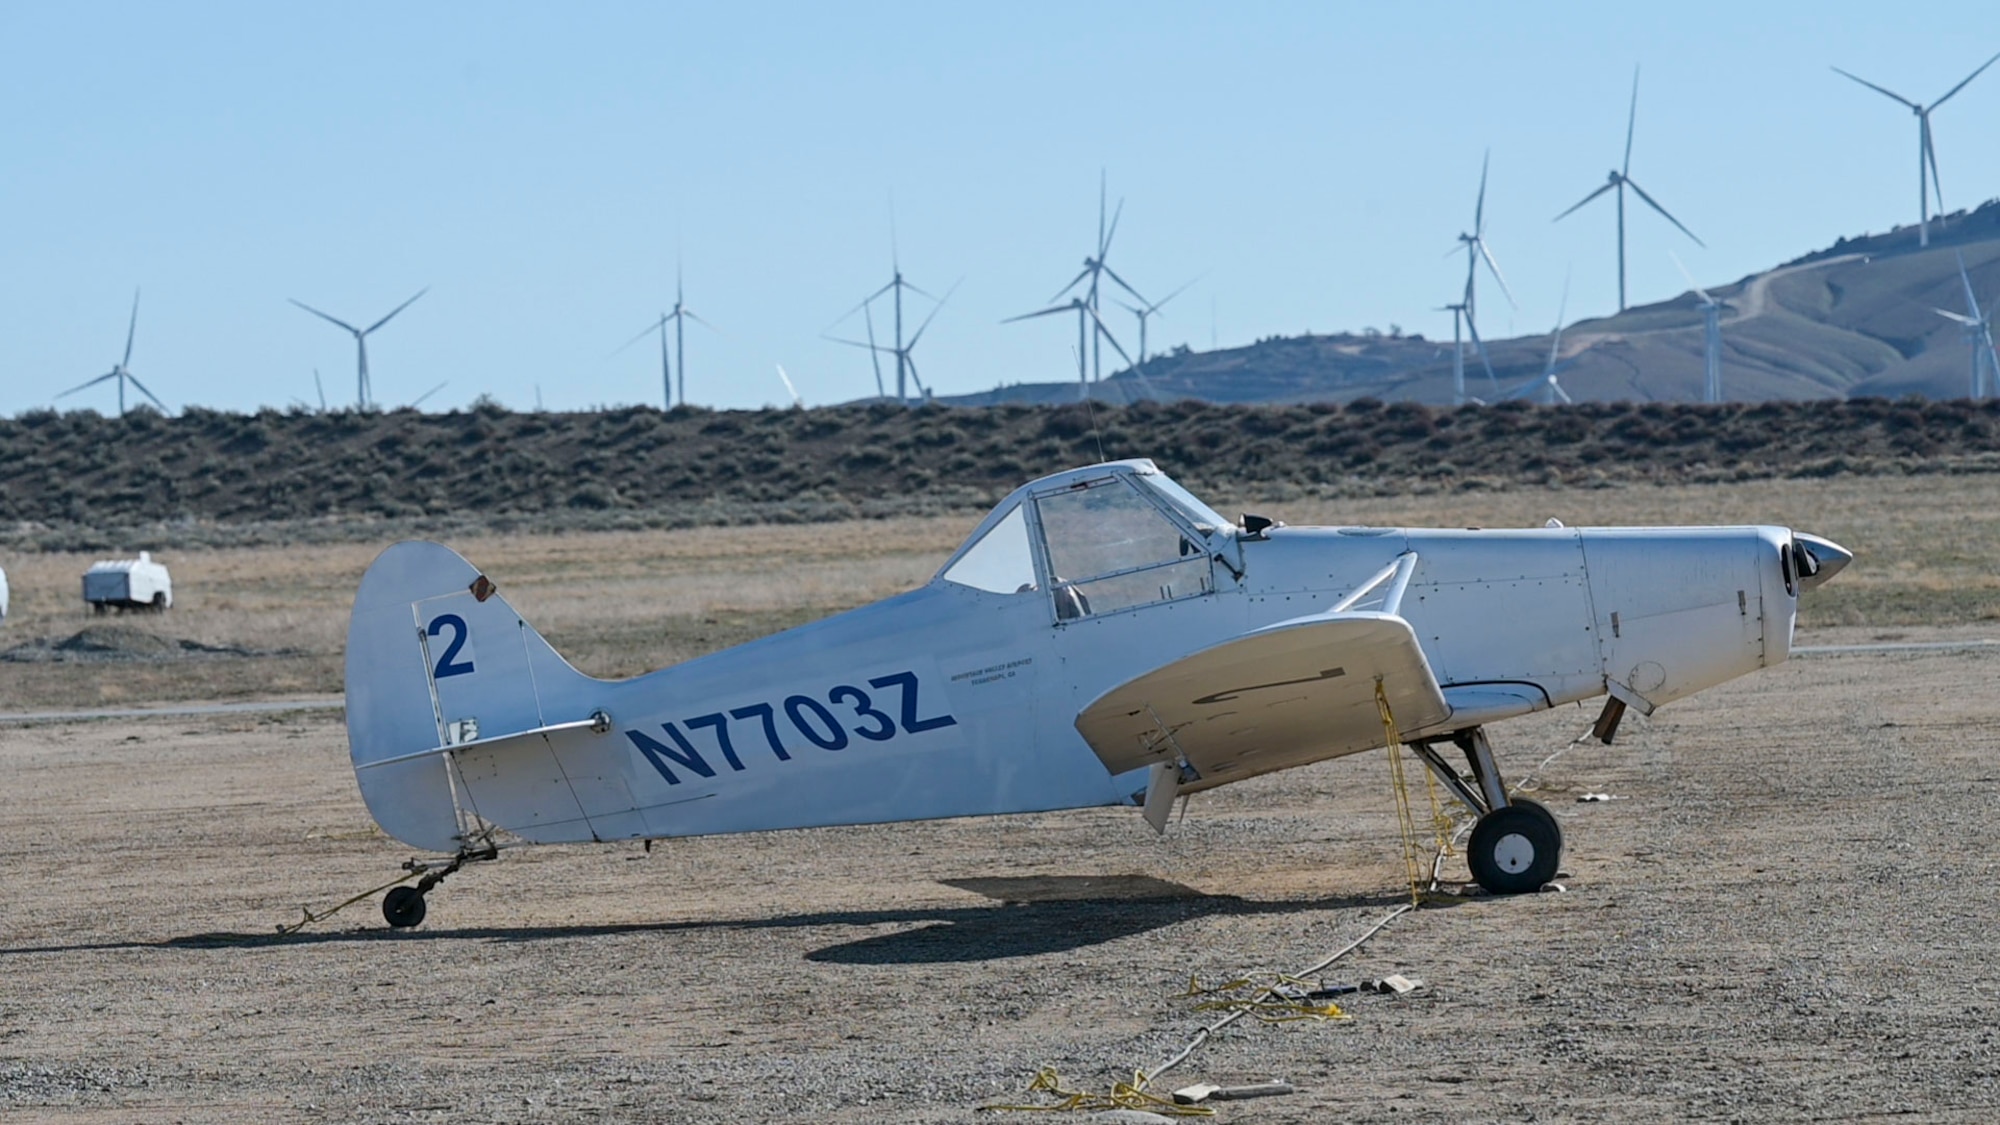 Skylark North Glider School in Tehachapi, California is where the Space Test Course was conducted. To celebrate National Engineering Week, the United States Air Force Test Pilot School based at Edwards Air Force Base went to Tehachapi to fly mountain gliders to simulate space shuttle approaches.